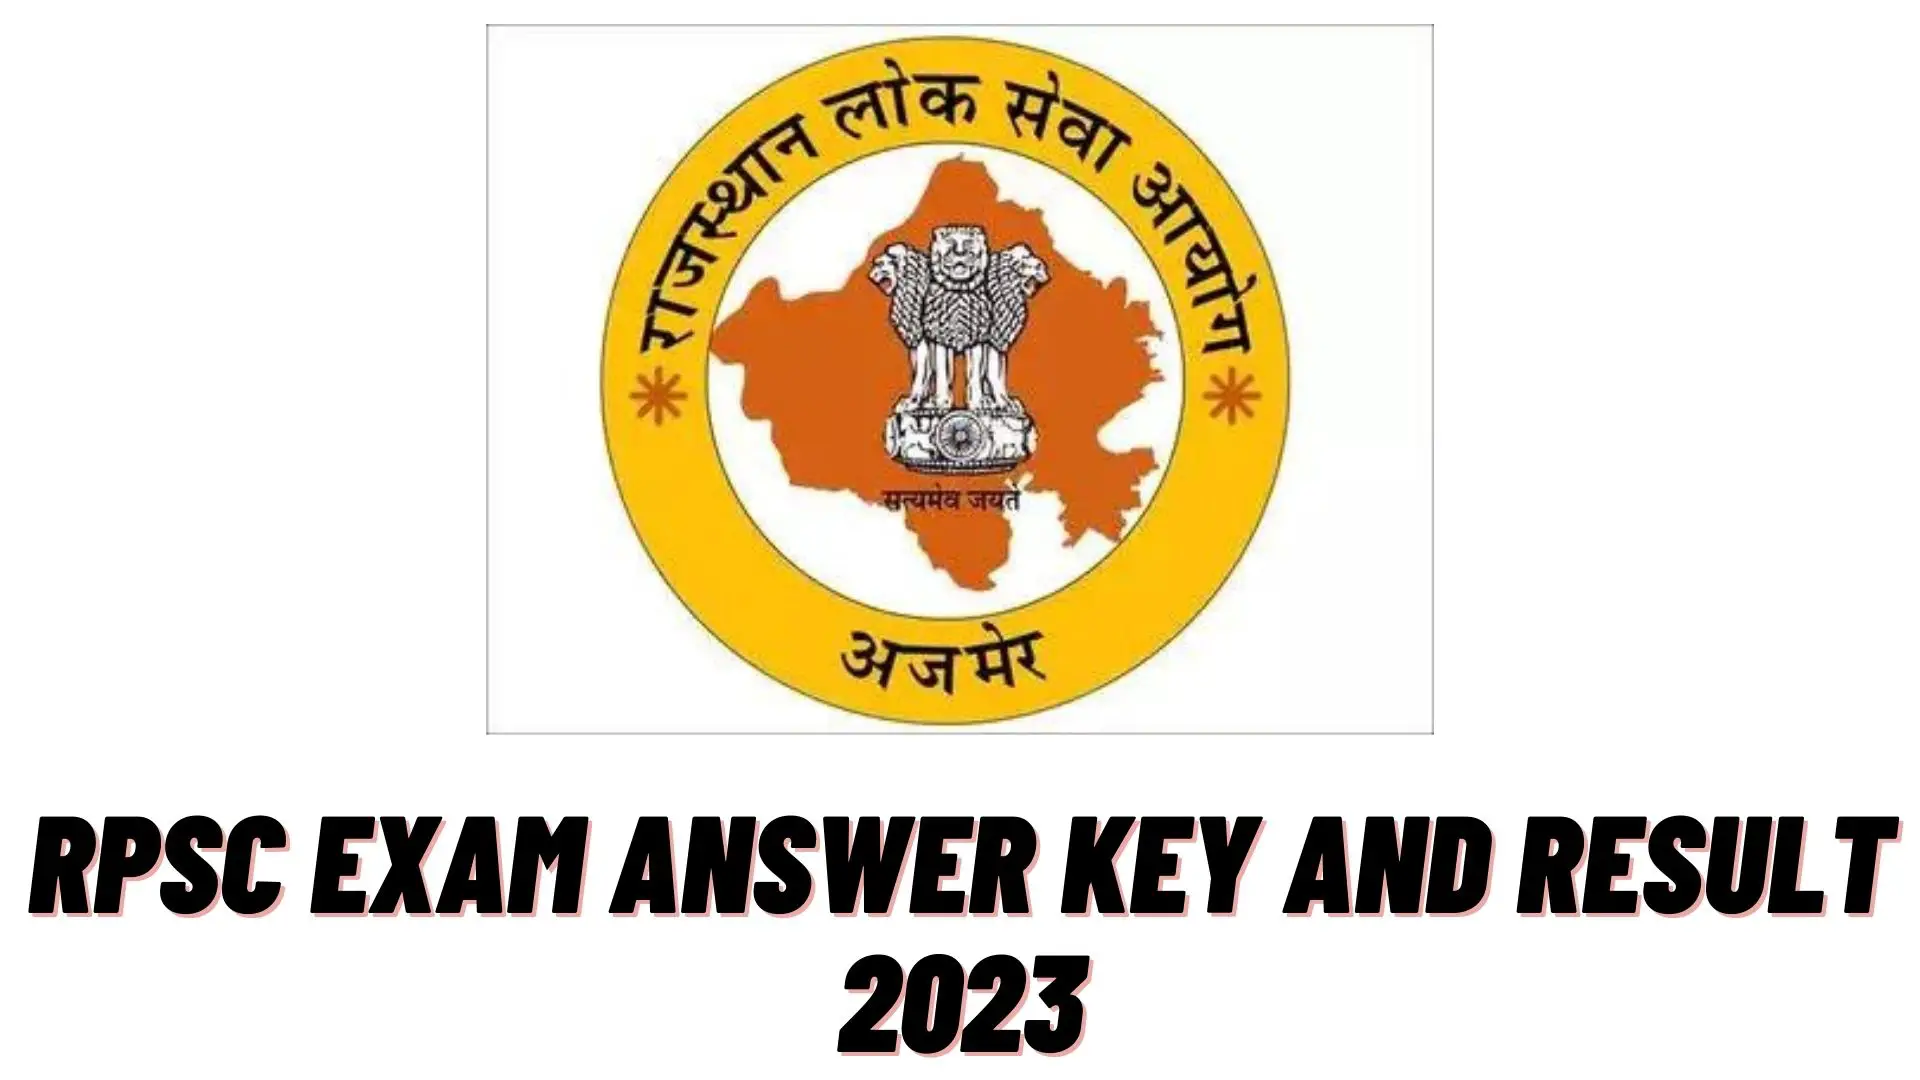 RPSC Exam Answer Key And Result 2023, Updates